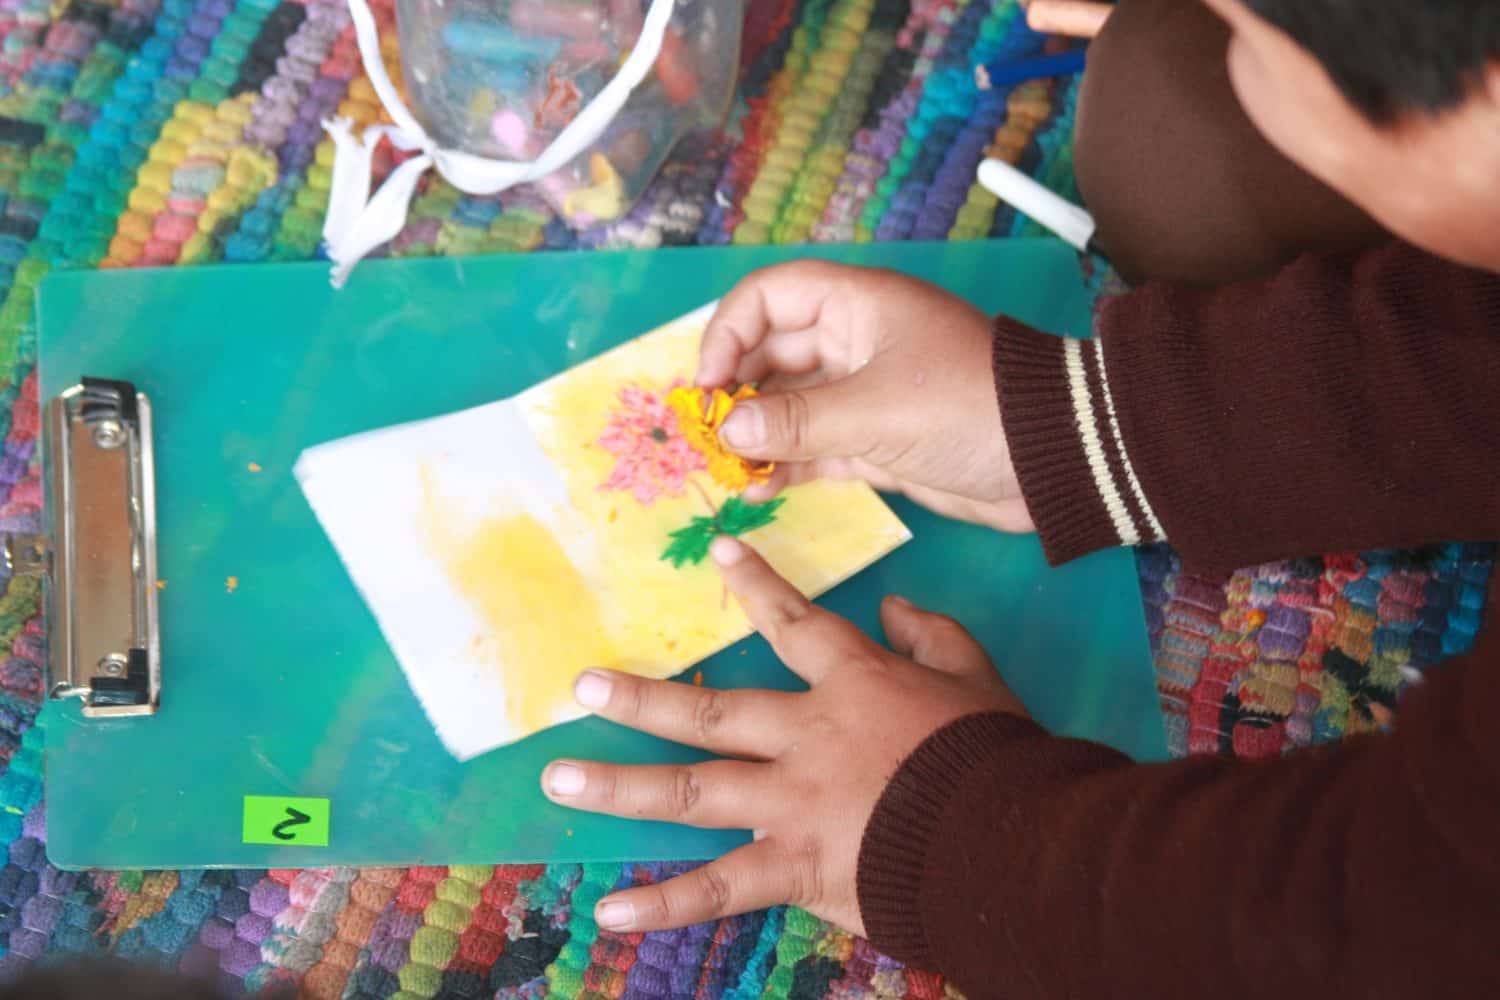 A young orphan child in Nepal learns to paint using natural color